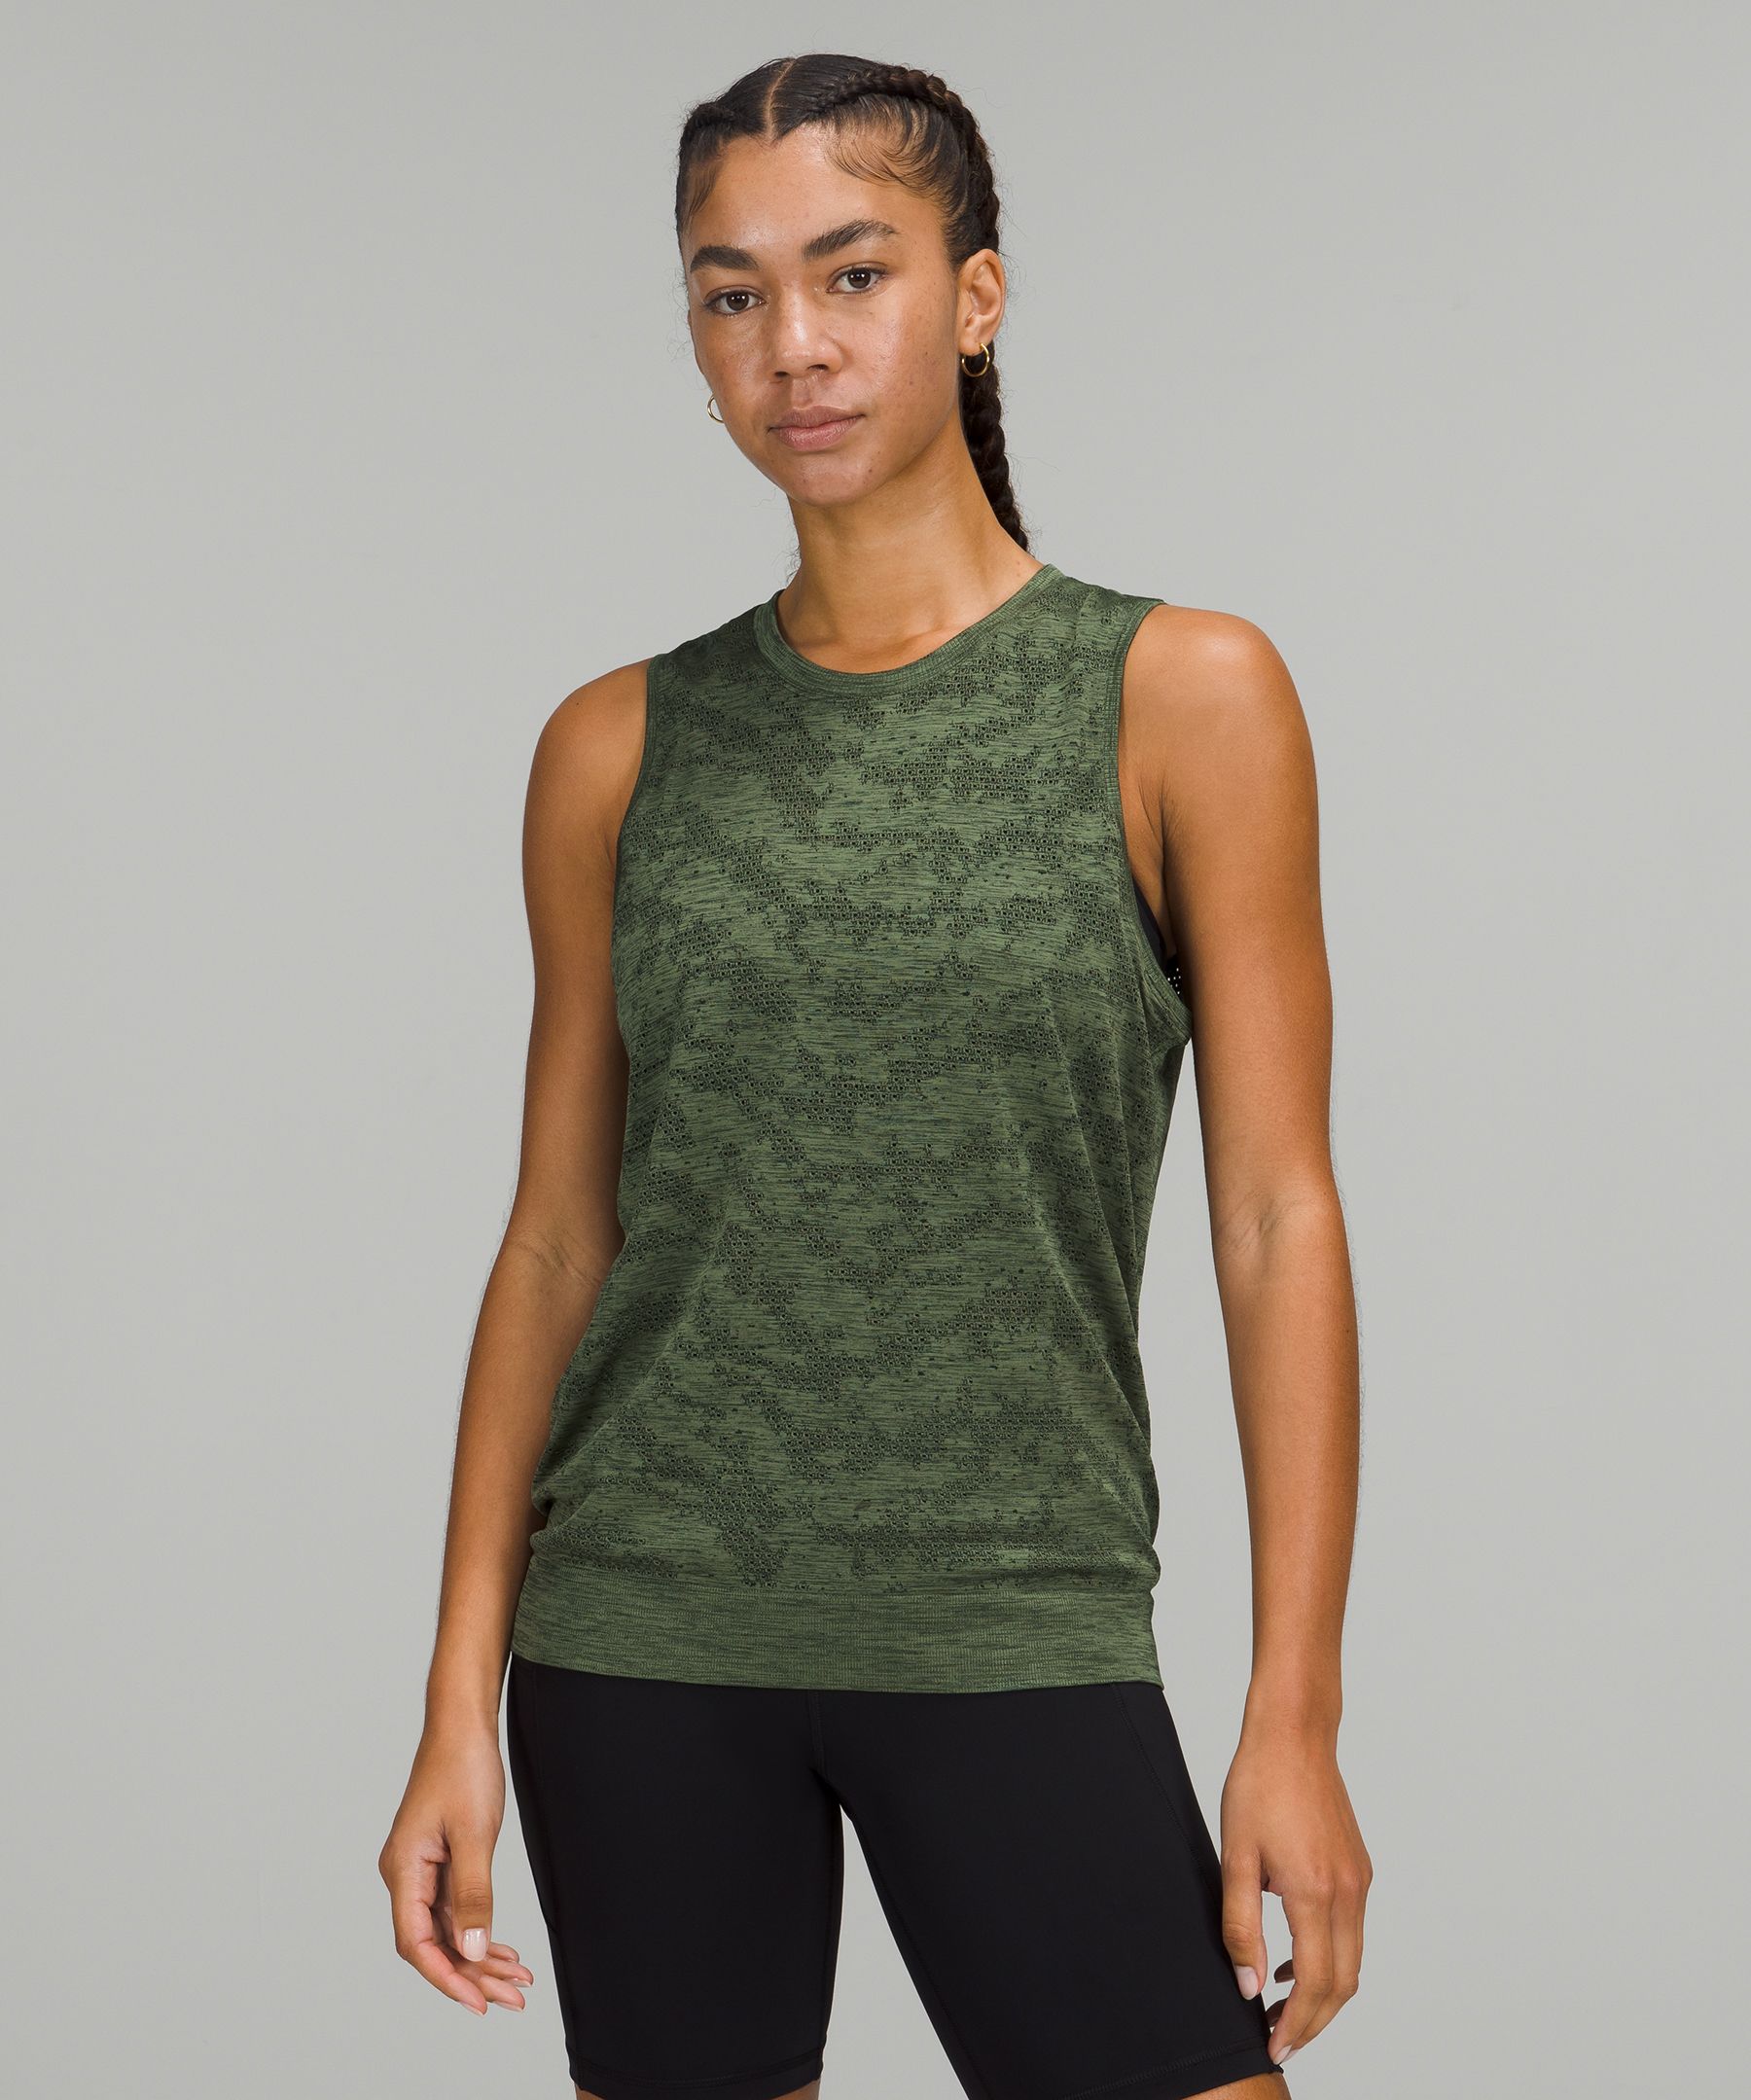 Lululemon Swiftly Breathe Relaxed-Fit Muscle Tank Top - 136550213